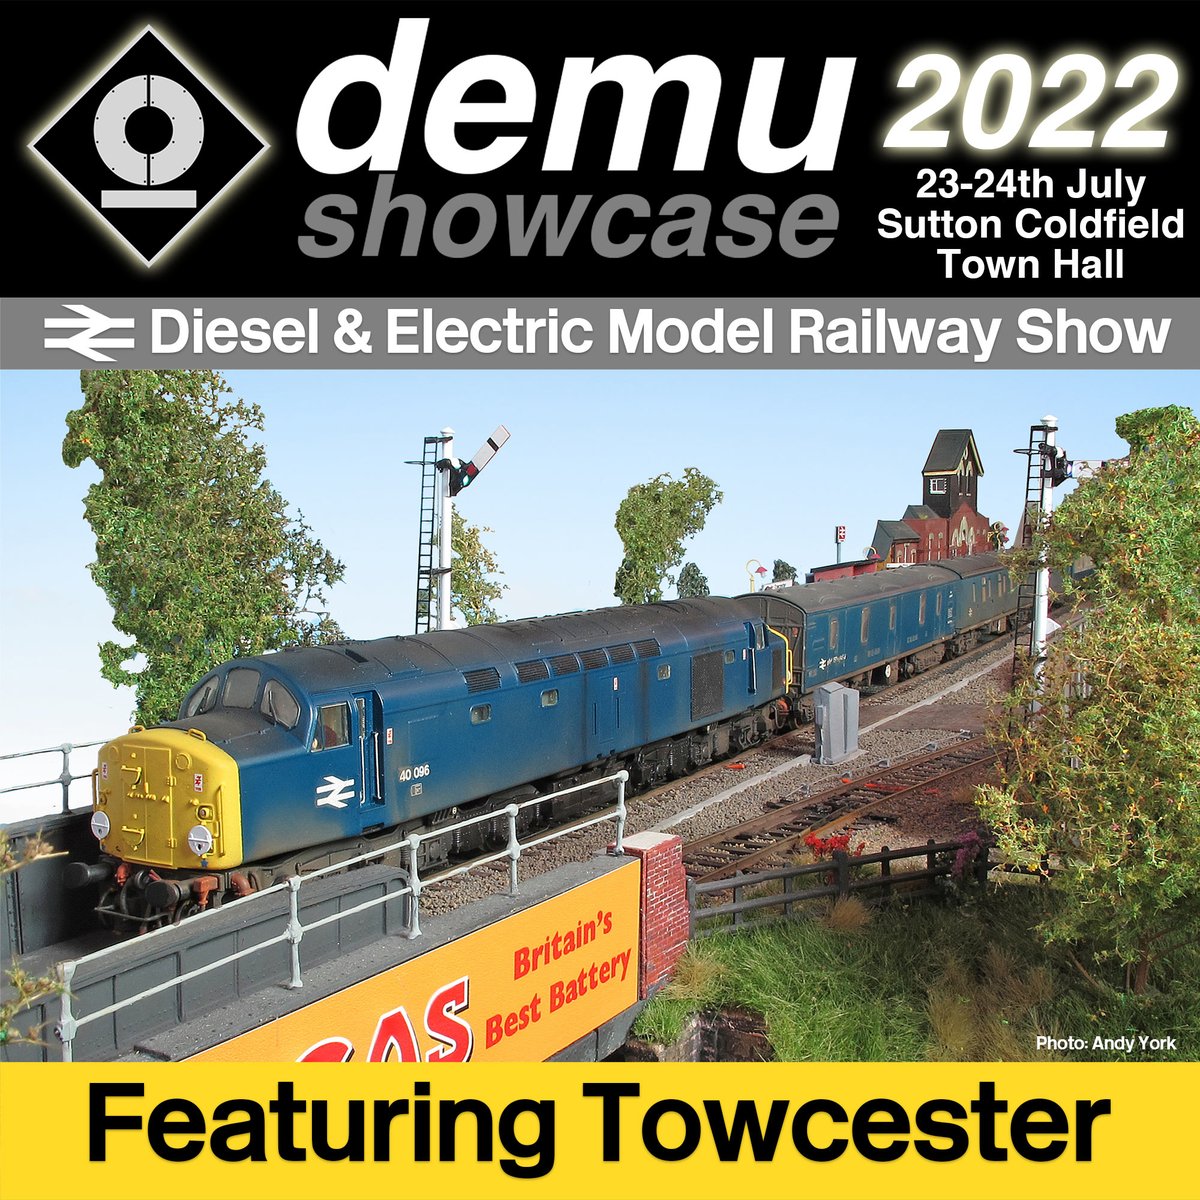 We are gearing up for this years show in July! Come along to Sutton Coldfield and see the final outing of John Norton and George Woodcock's masterpiece 'Towcester' before it retires from the circuit. Set in the halcyon days of 1977 in BR 'banger blue'.